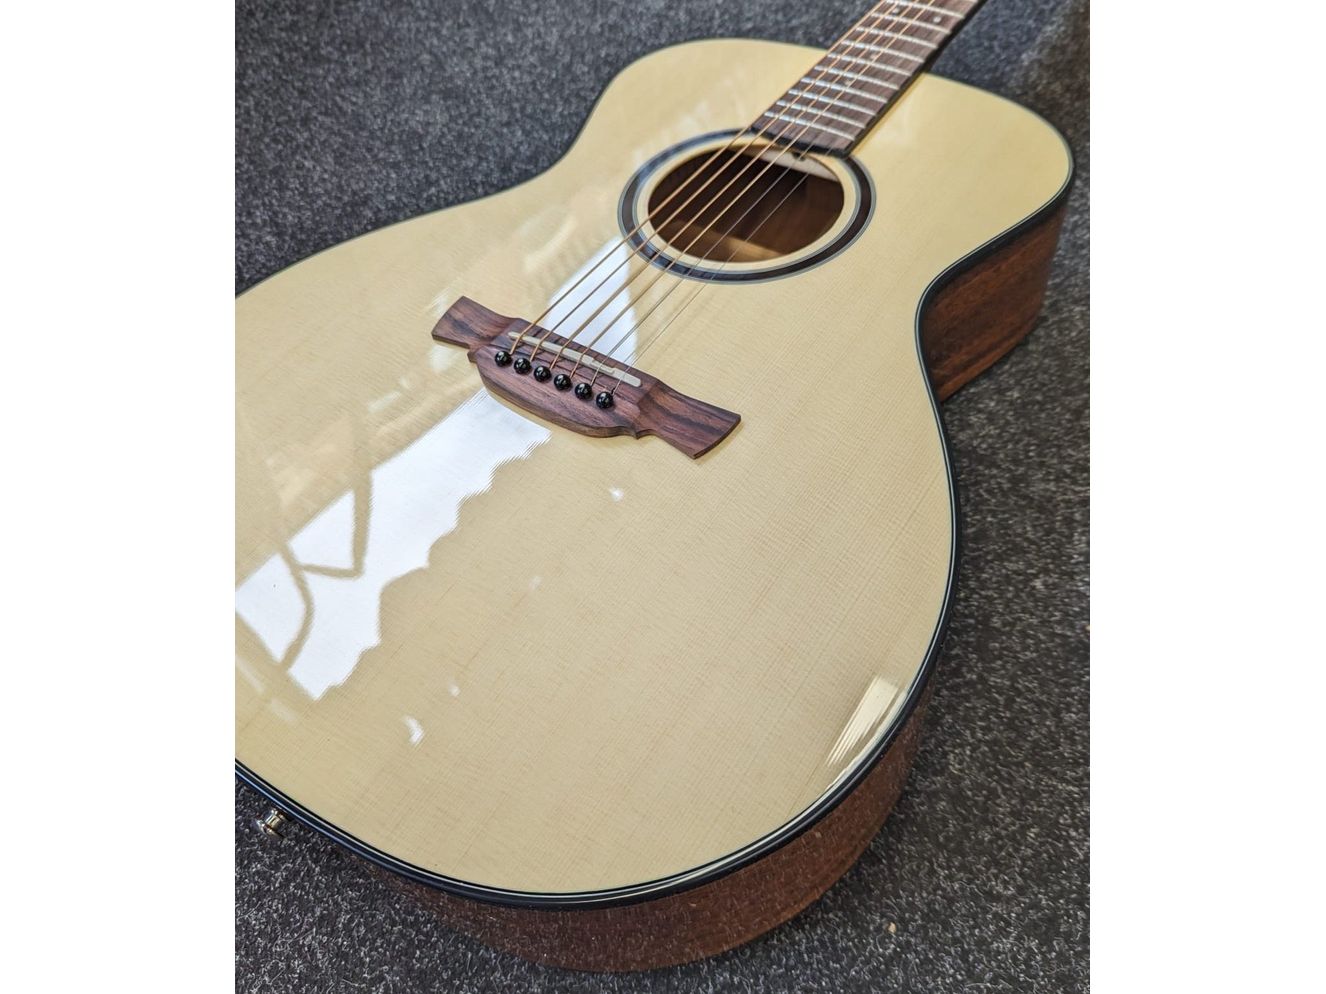 Crafter Able T-600 Orchestra Acoustic Guitar In Natural